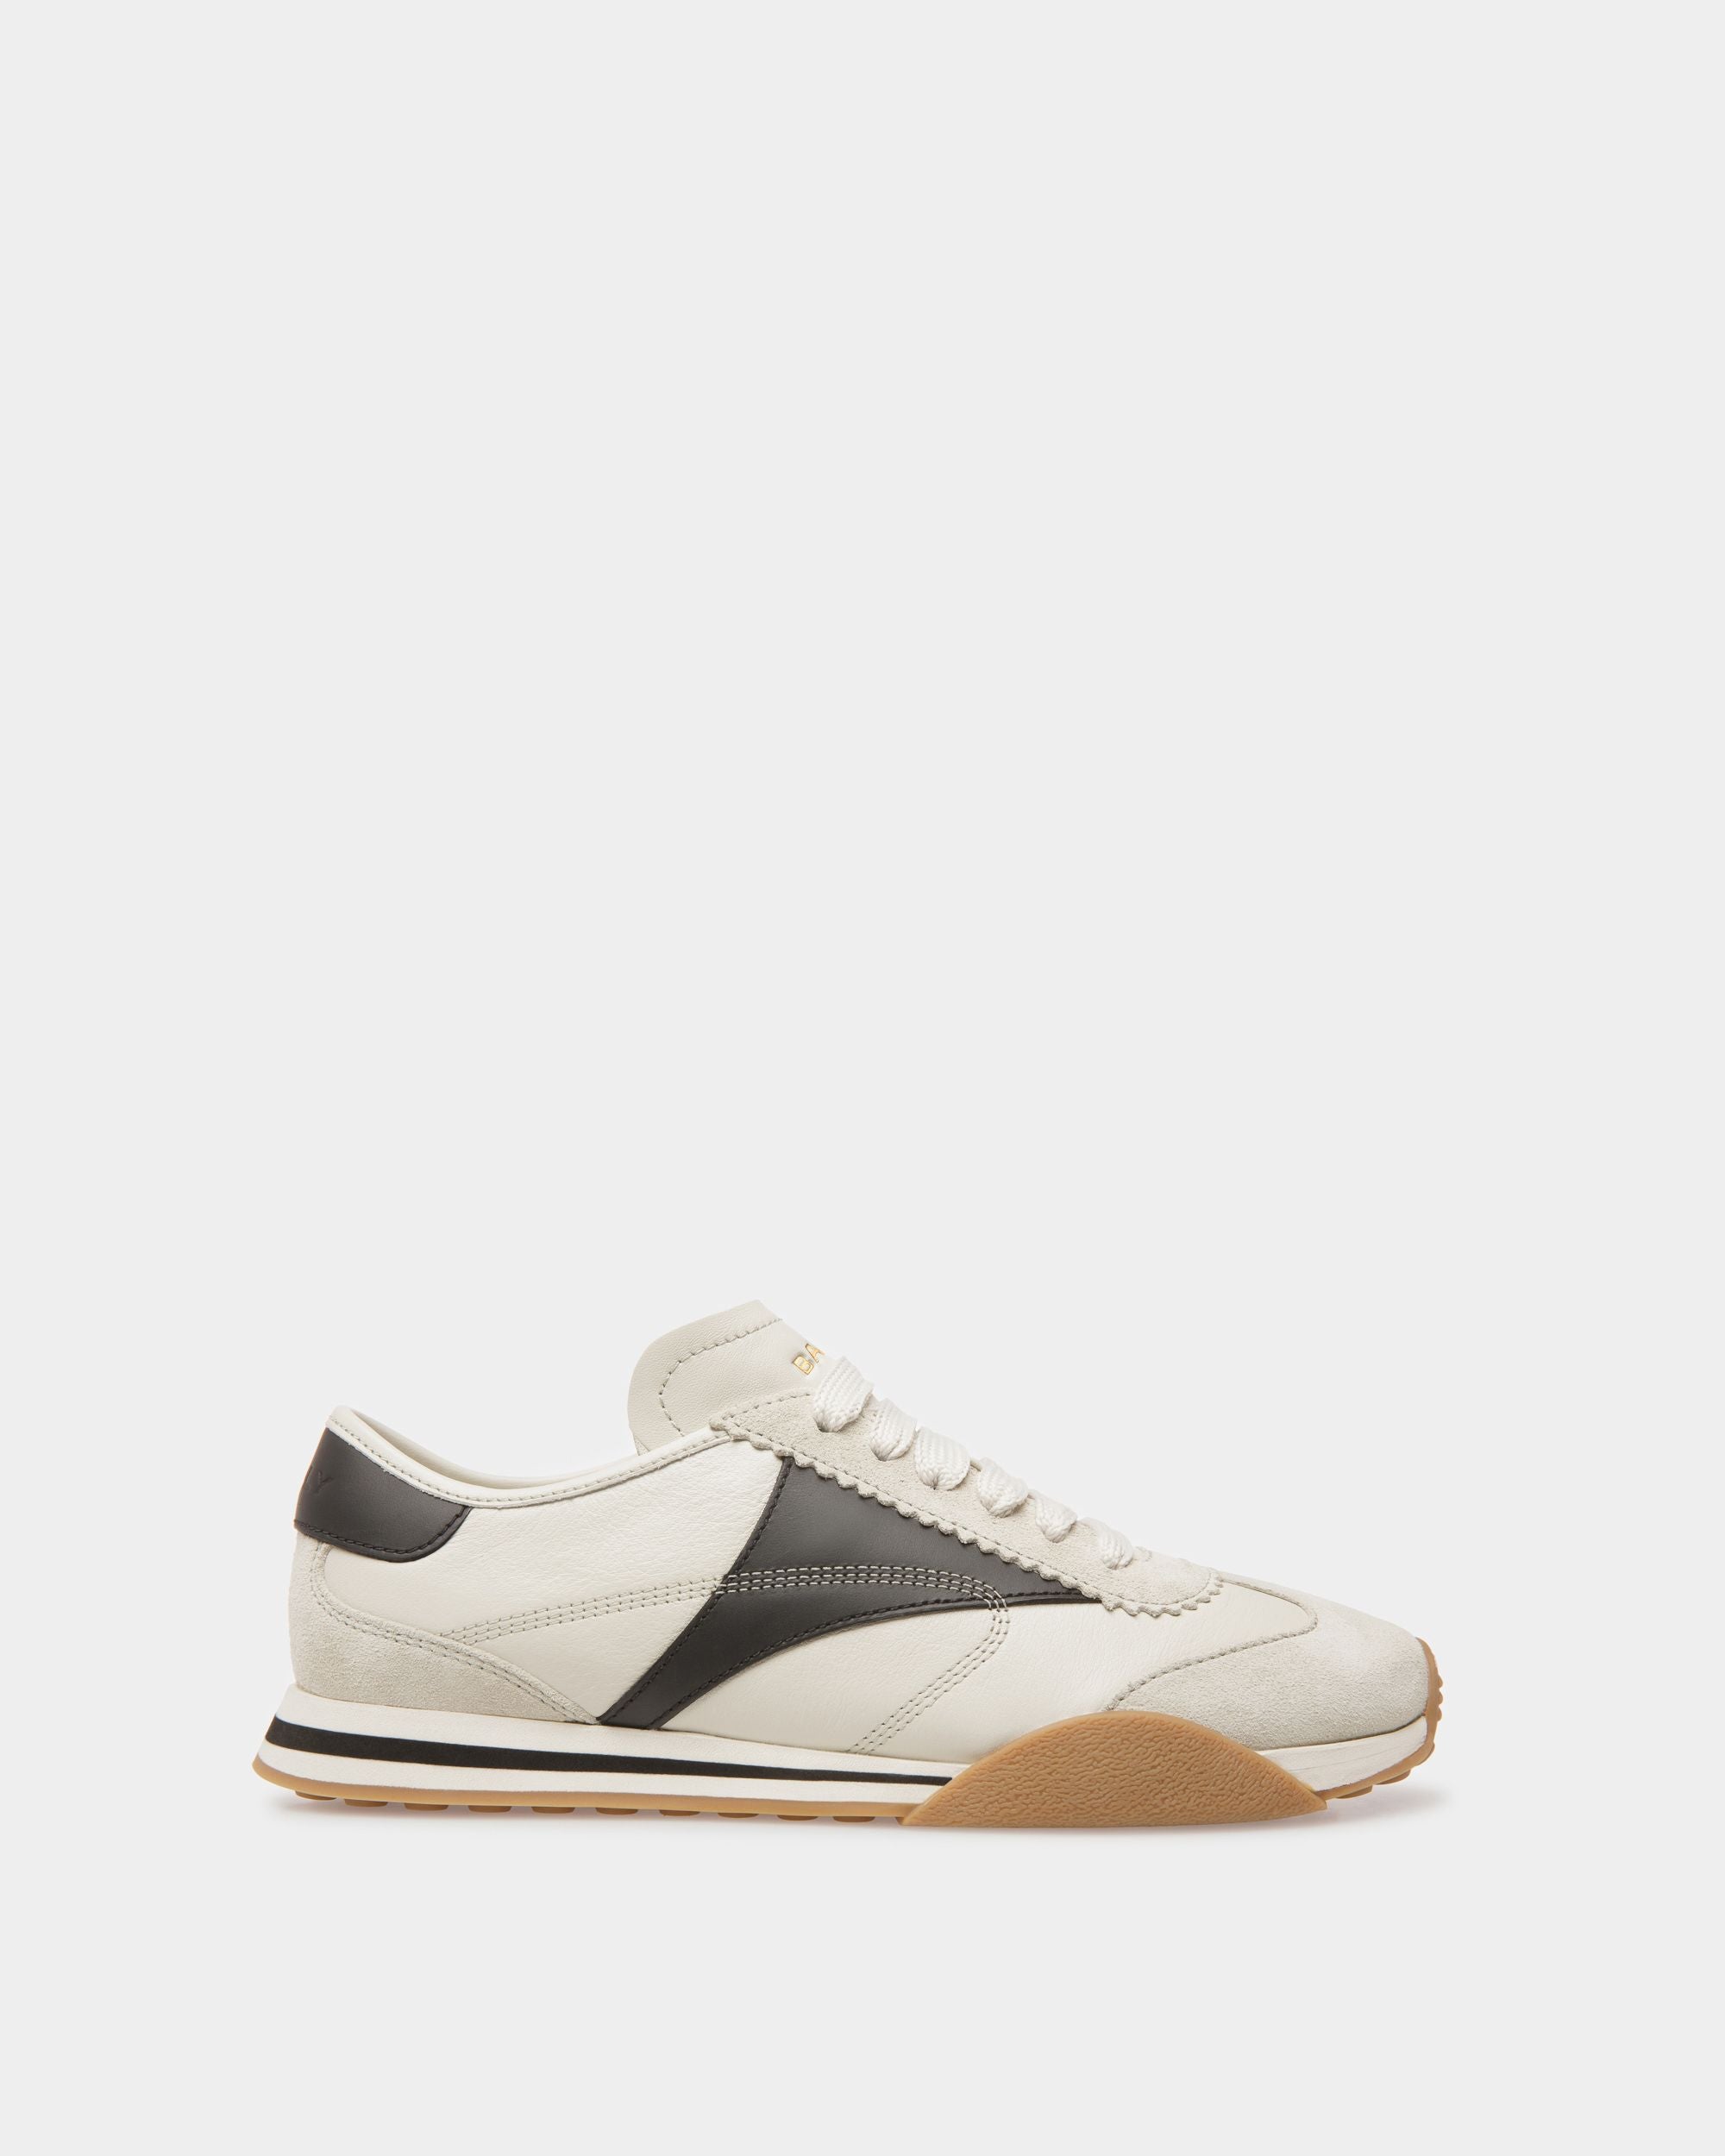 Sonney | Women's Sneakers | Dusty White And Black Leather | Bally | Still Life Side